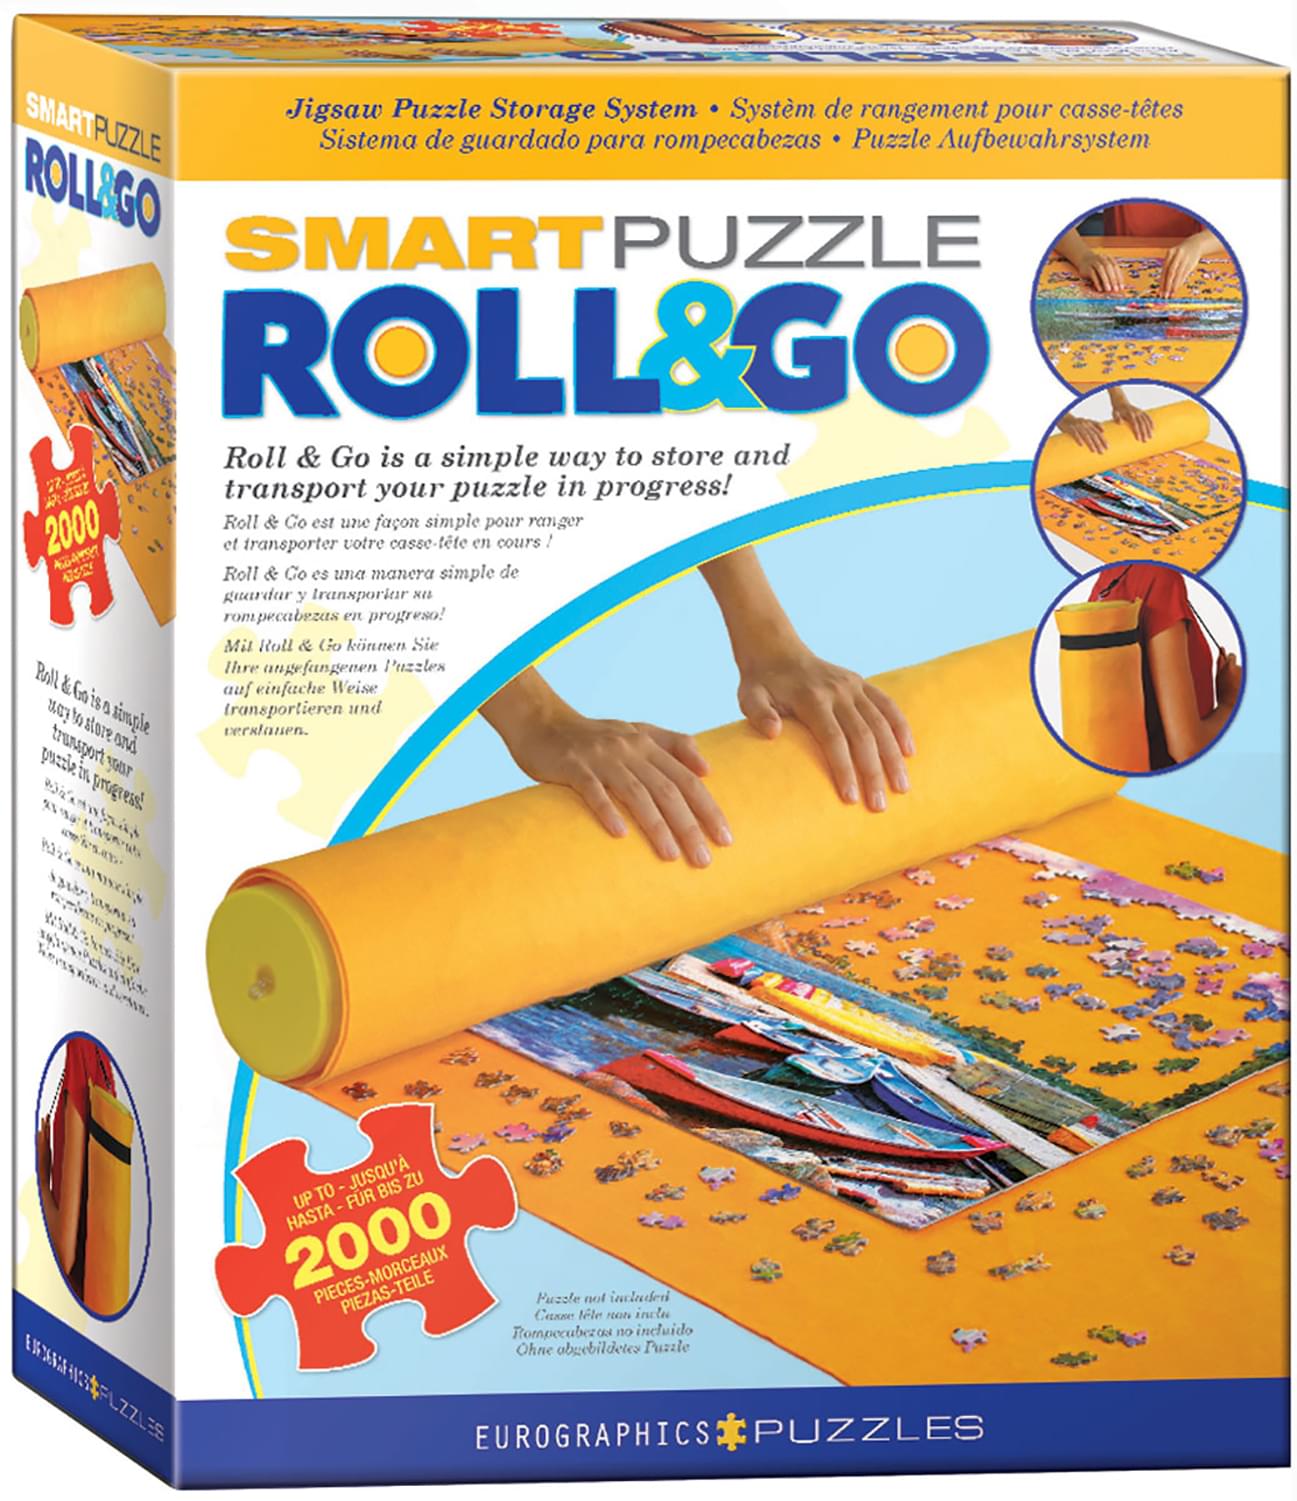 SmartPuzzle Roll & Go Jigsaw Puzzle Mat , Fits 2000 Pieces